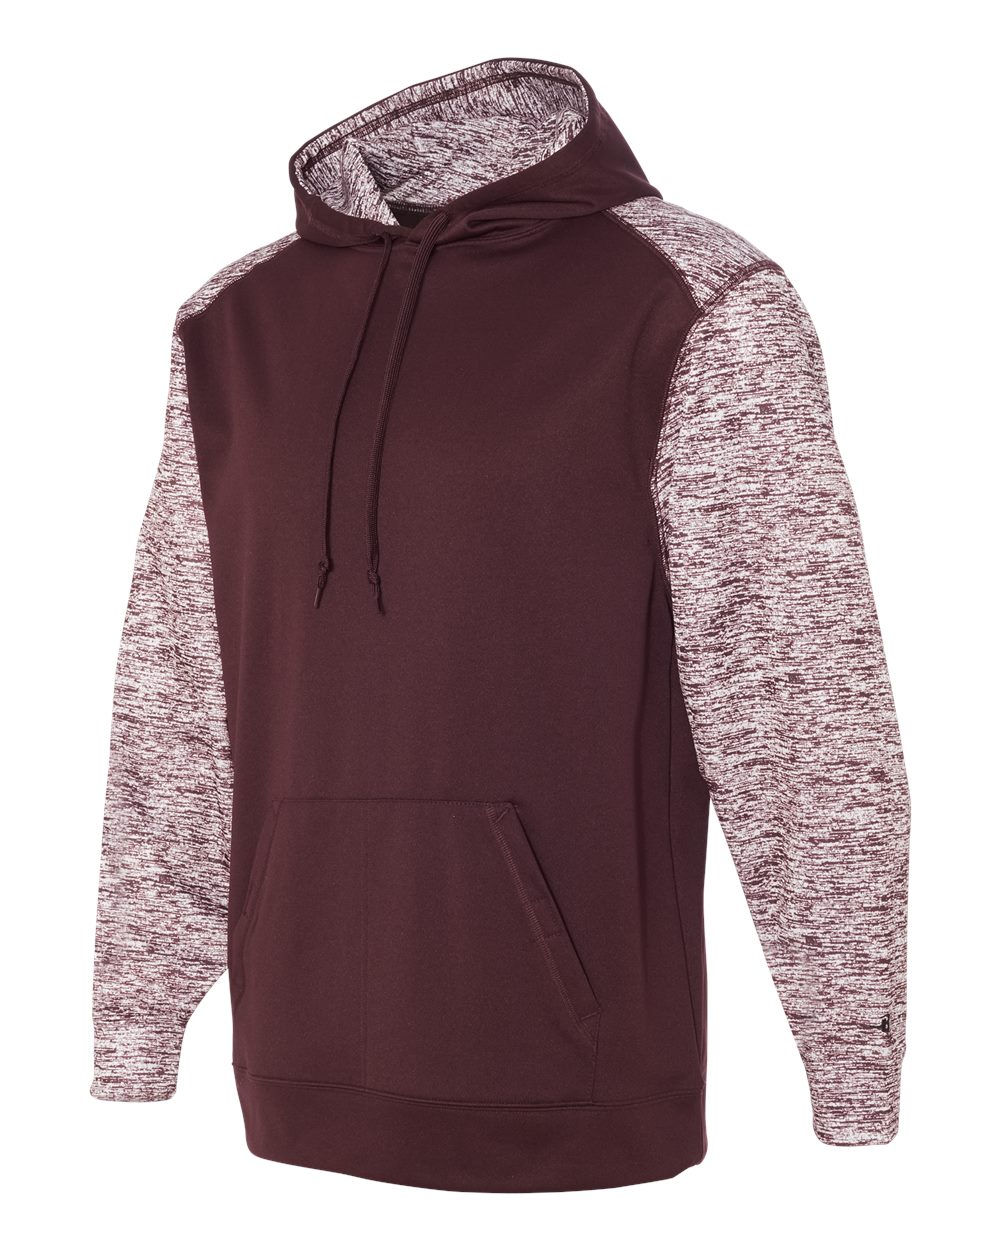 click to view Maroon/ Maroon Blend